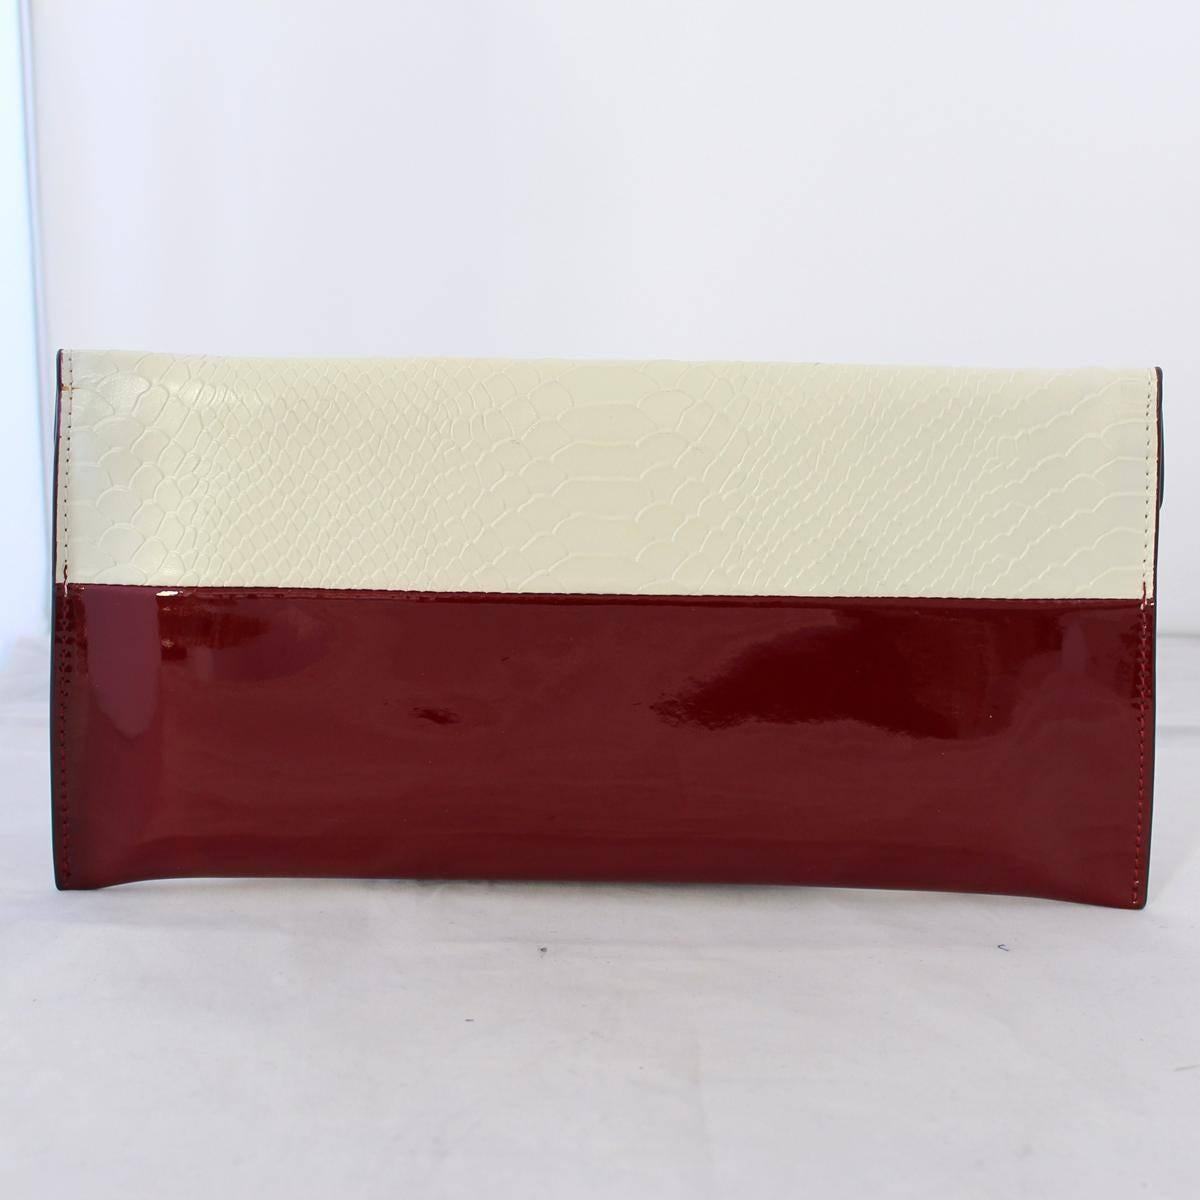 Very chic Roberto Cavalli pochette
Patent leather
Bordeaux color
Reptile printed leather
Cream color
Golden chain
Authomatic jewel closure
Additional zip closure
Cm 32 x 15 (12.5 x 5.9 inches)
Worldide express shipping included in the price !